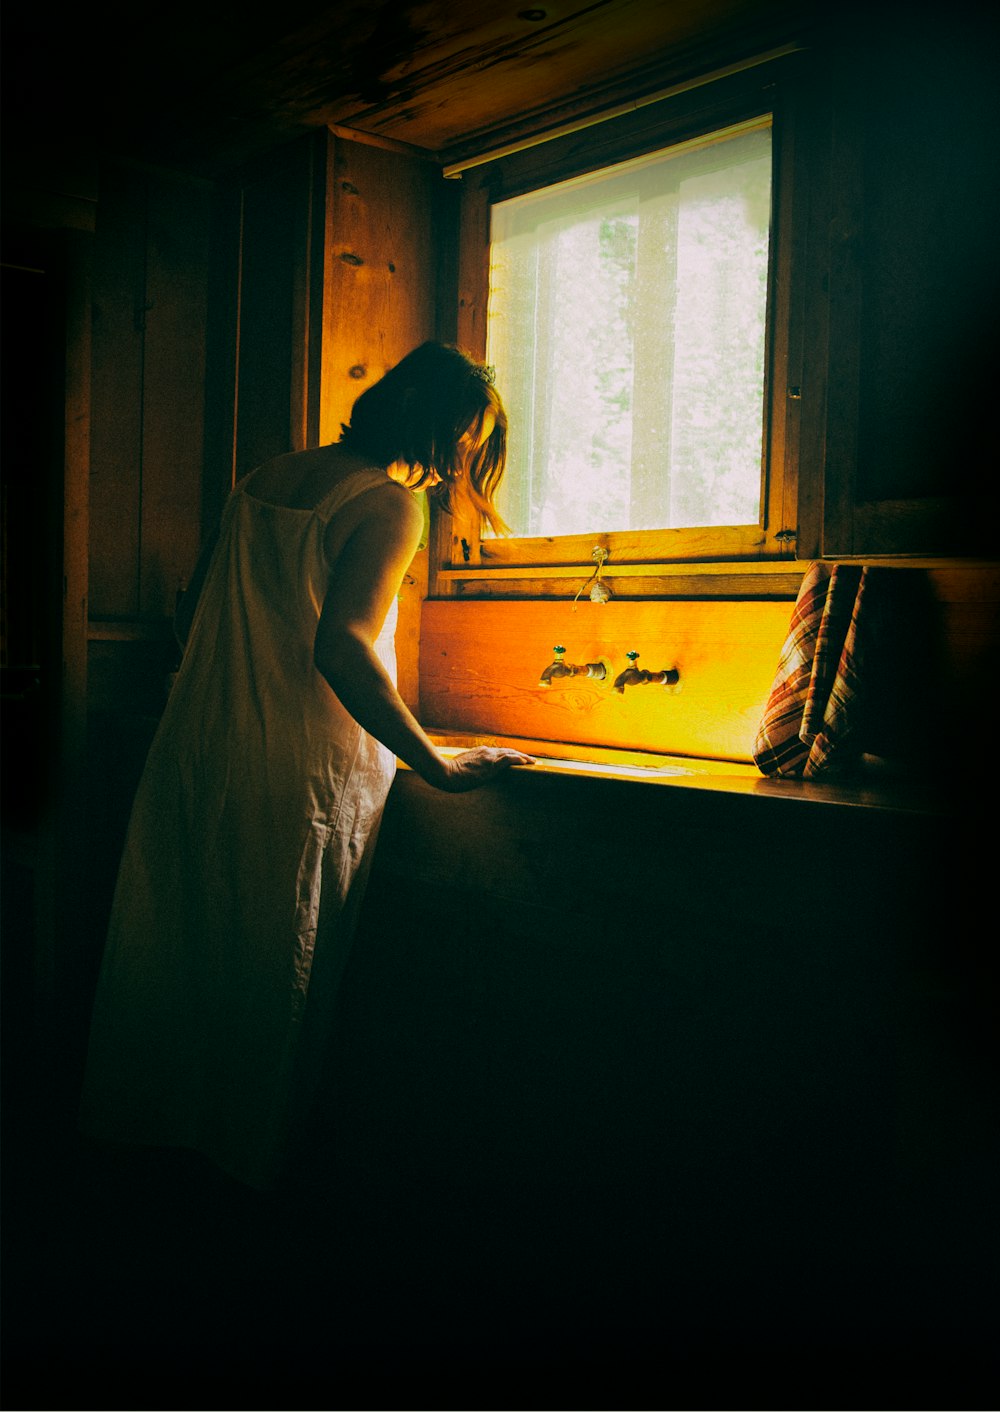 woman in white dress standing by the window